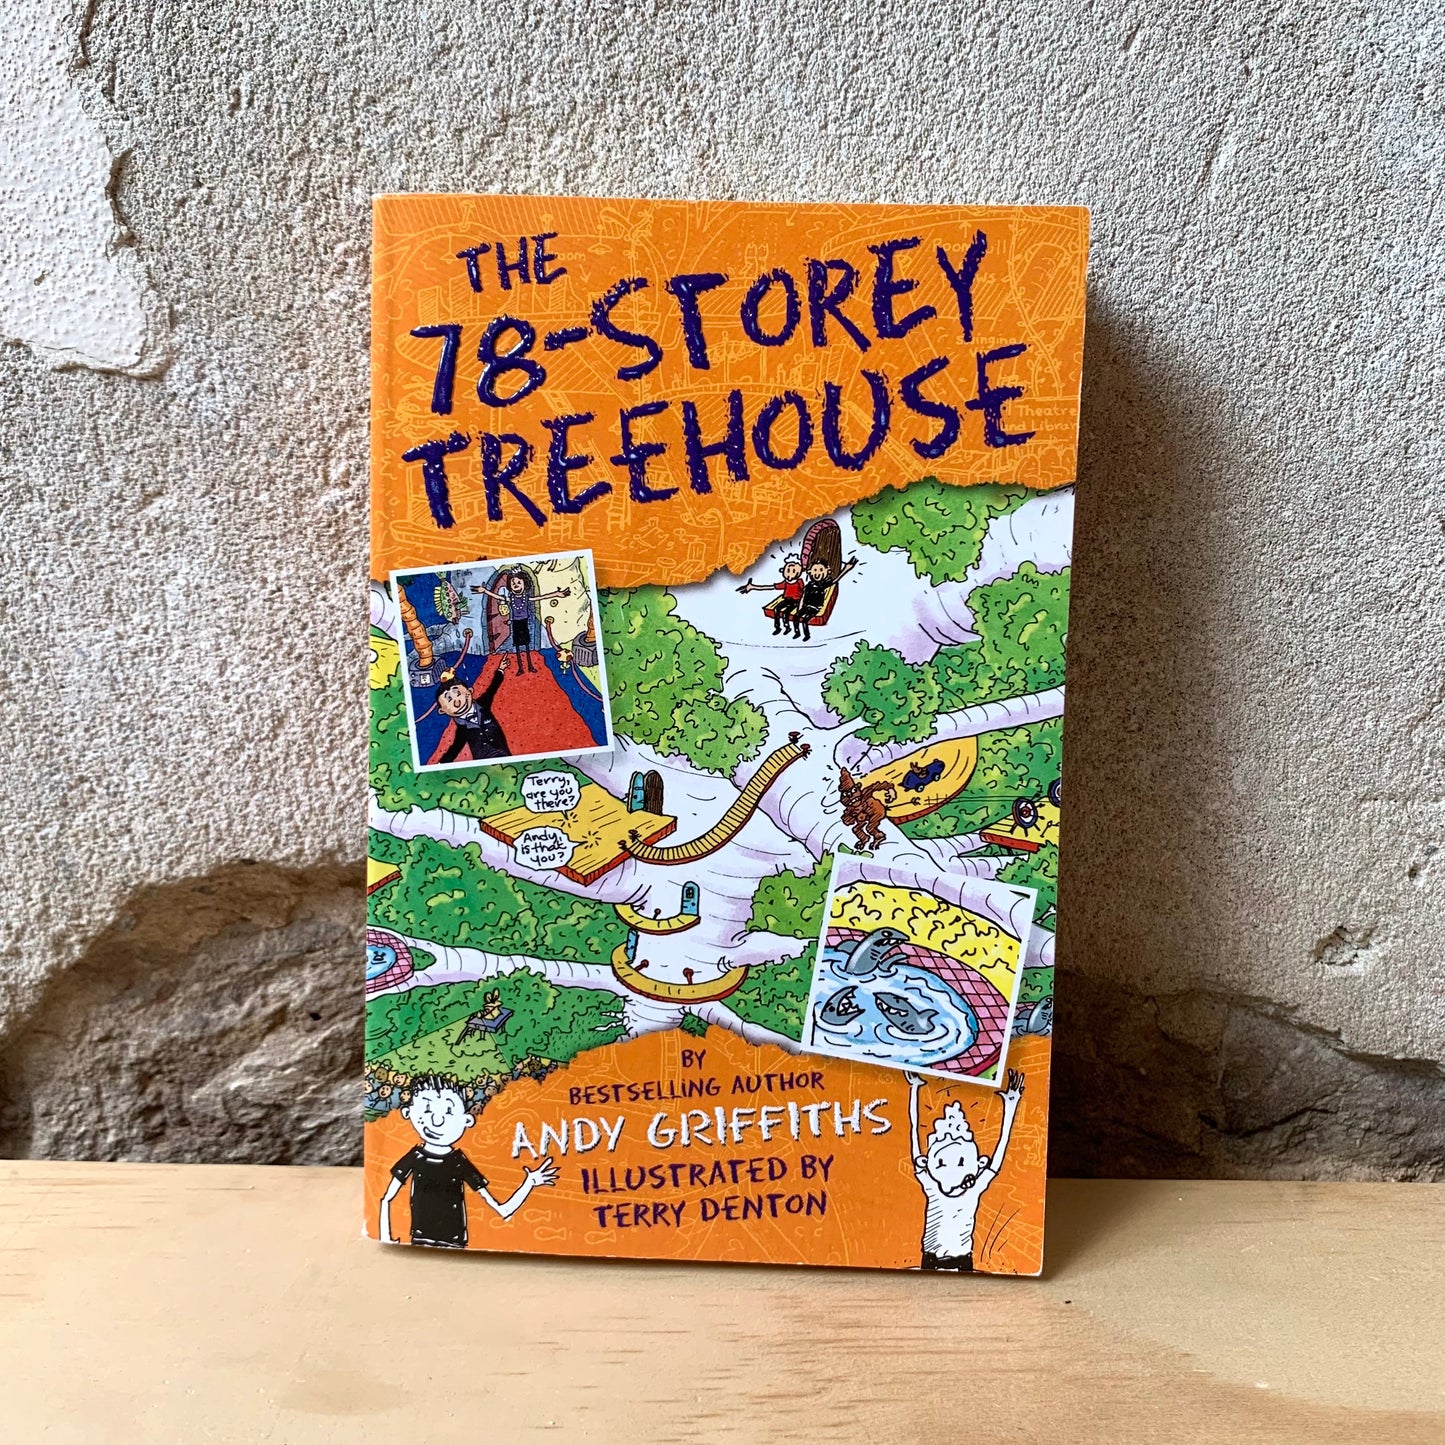 The 78-Storey Treehouse – Andy Griffiths, Terry Denton